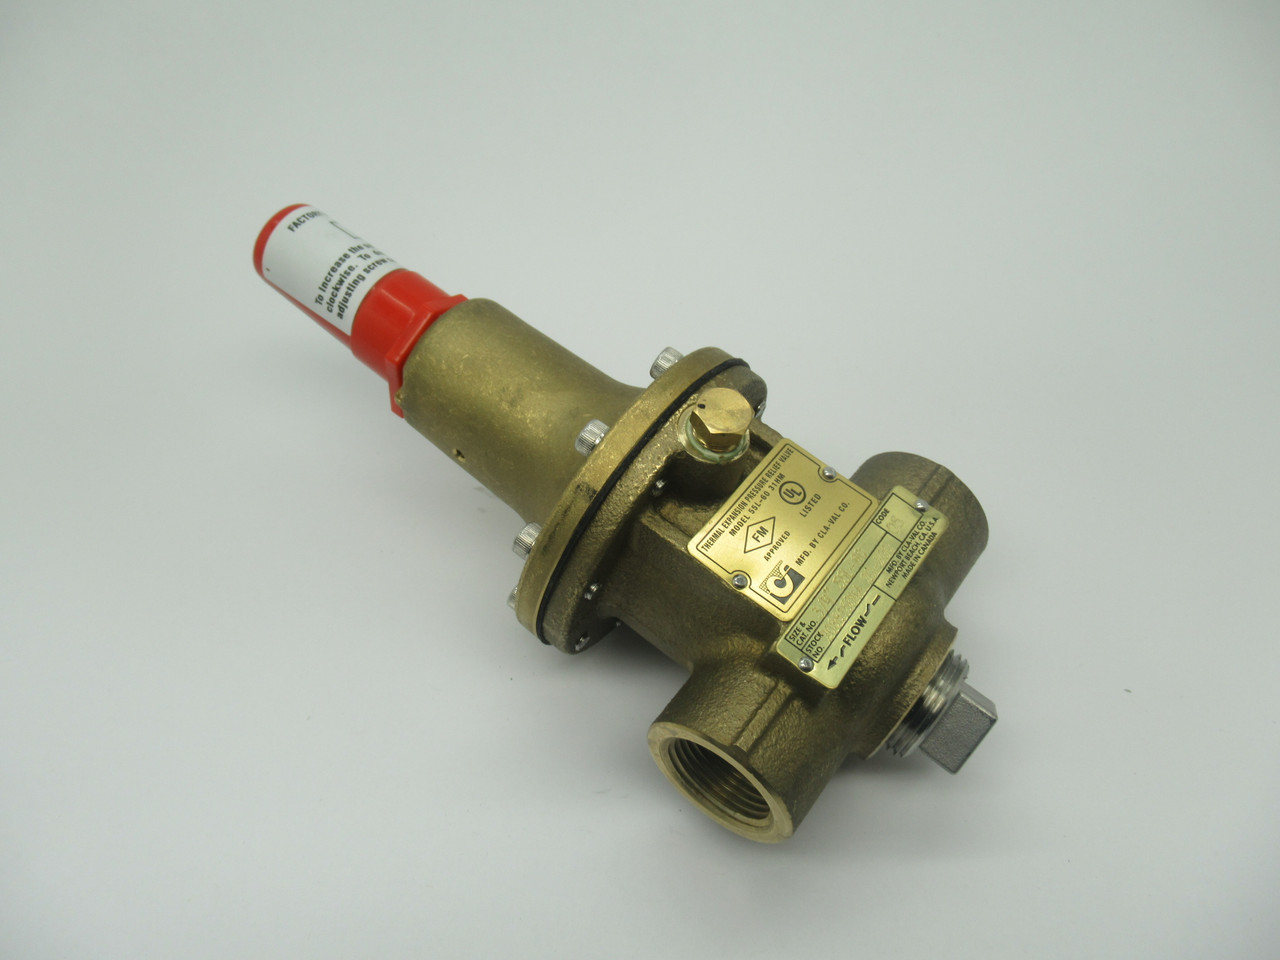 Cla-Val 20881504A Pressure Relief Valve 3/4" 20-200Psi Direct Acting NOP